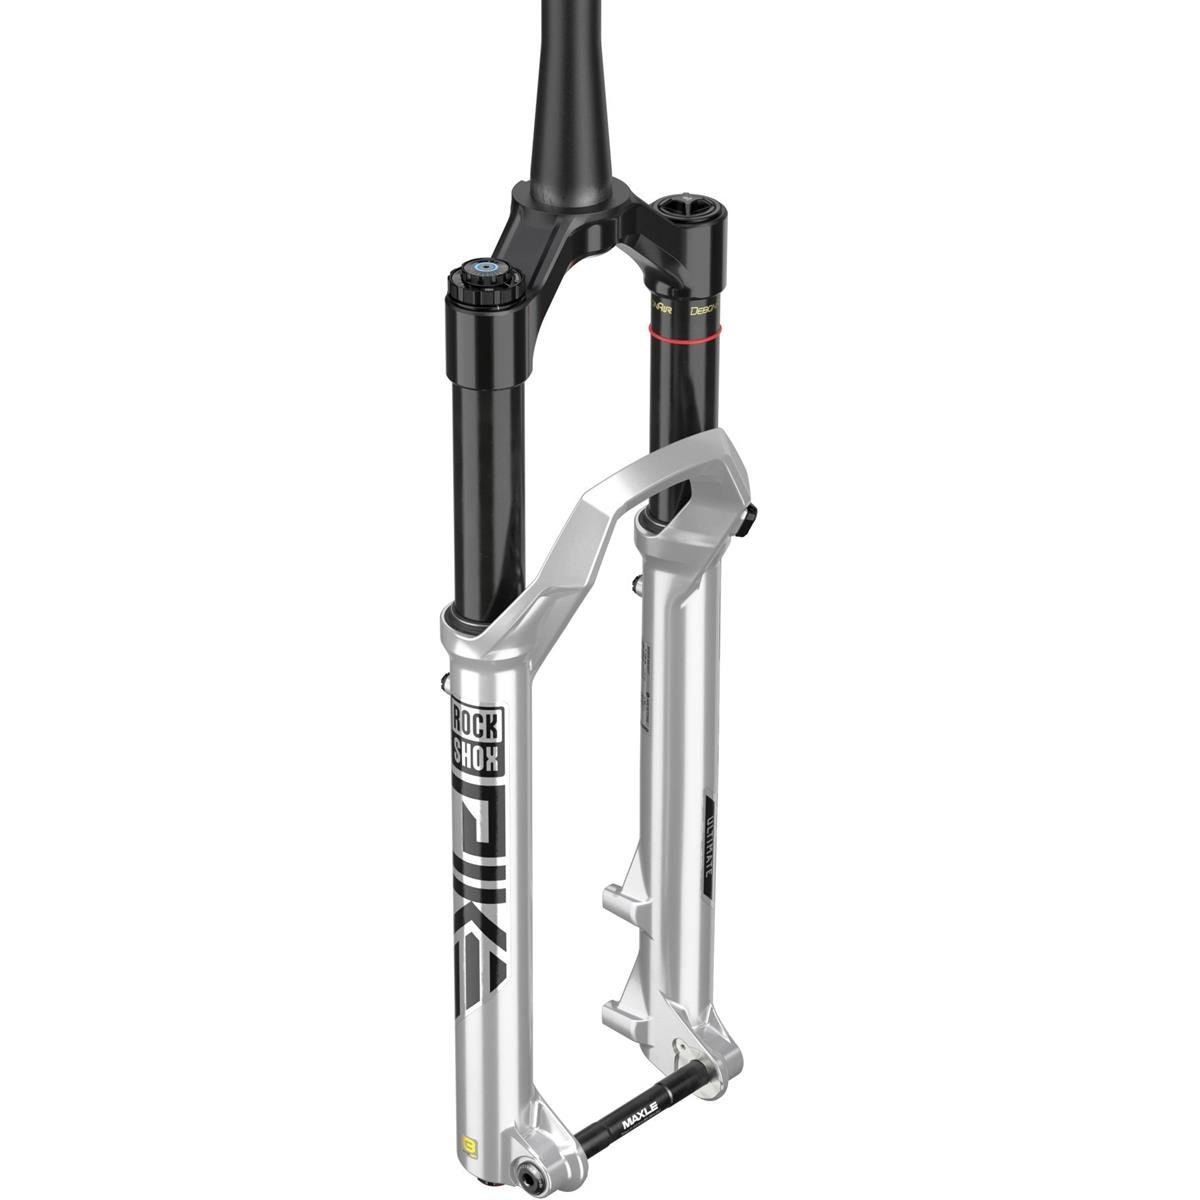 RockShox Federgabel Pike Ultimate Charger 3 RC2 29 Zoll, 15x110 mm, Silber, 44 mm Offset, 140 mm